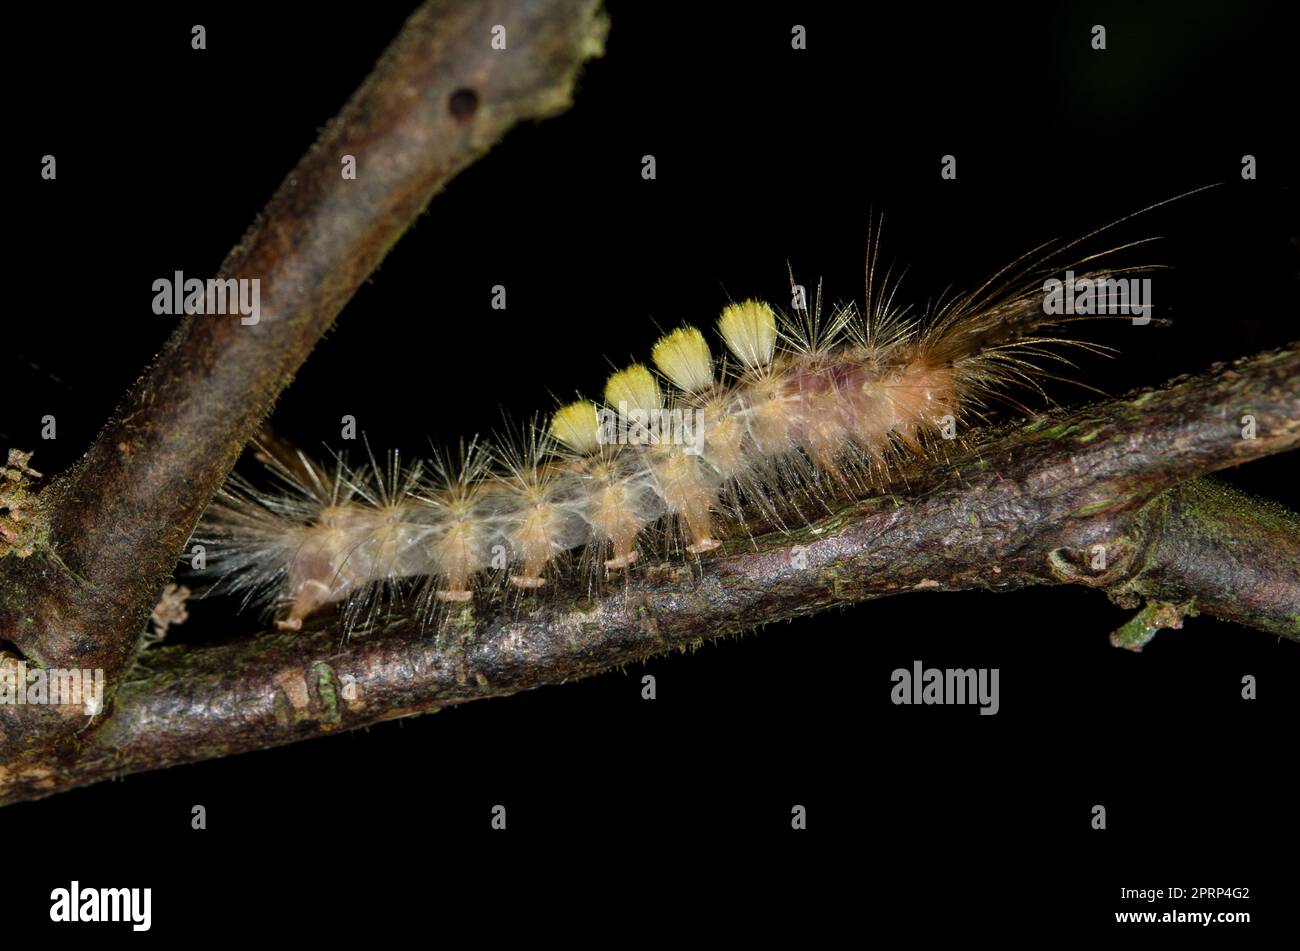 Tussock Moth Caterpillar, Lymantriidae Family, with long hairs for protection on, Klungkung, Bali, Indonesia Stock Photo